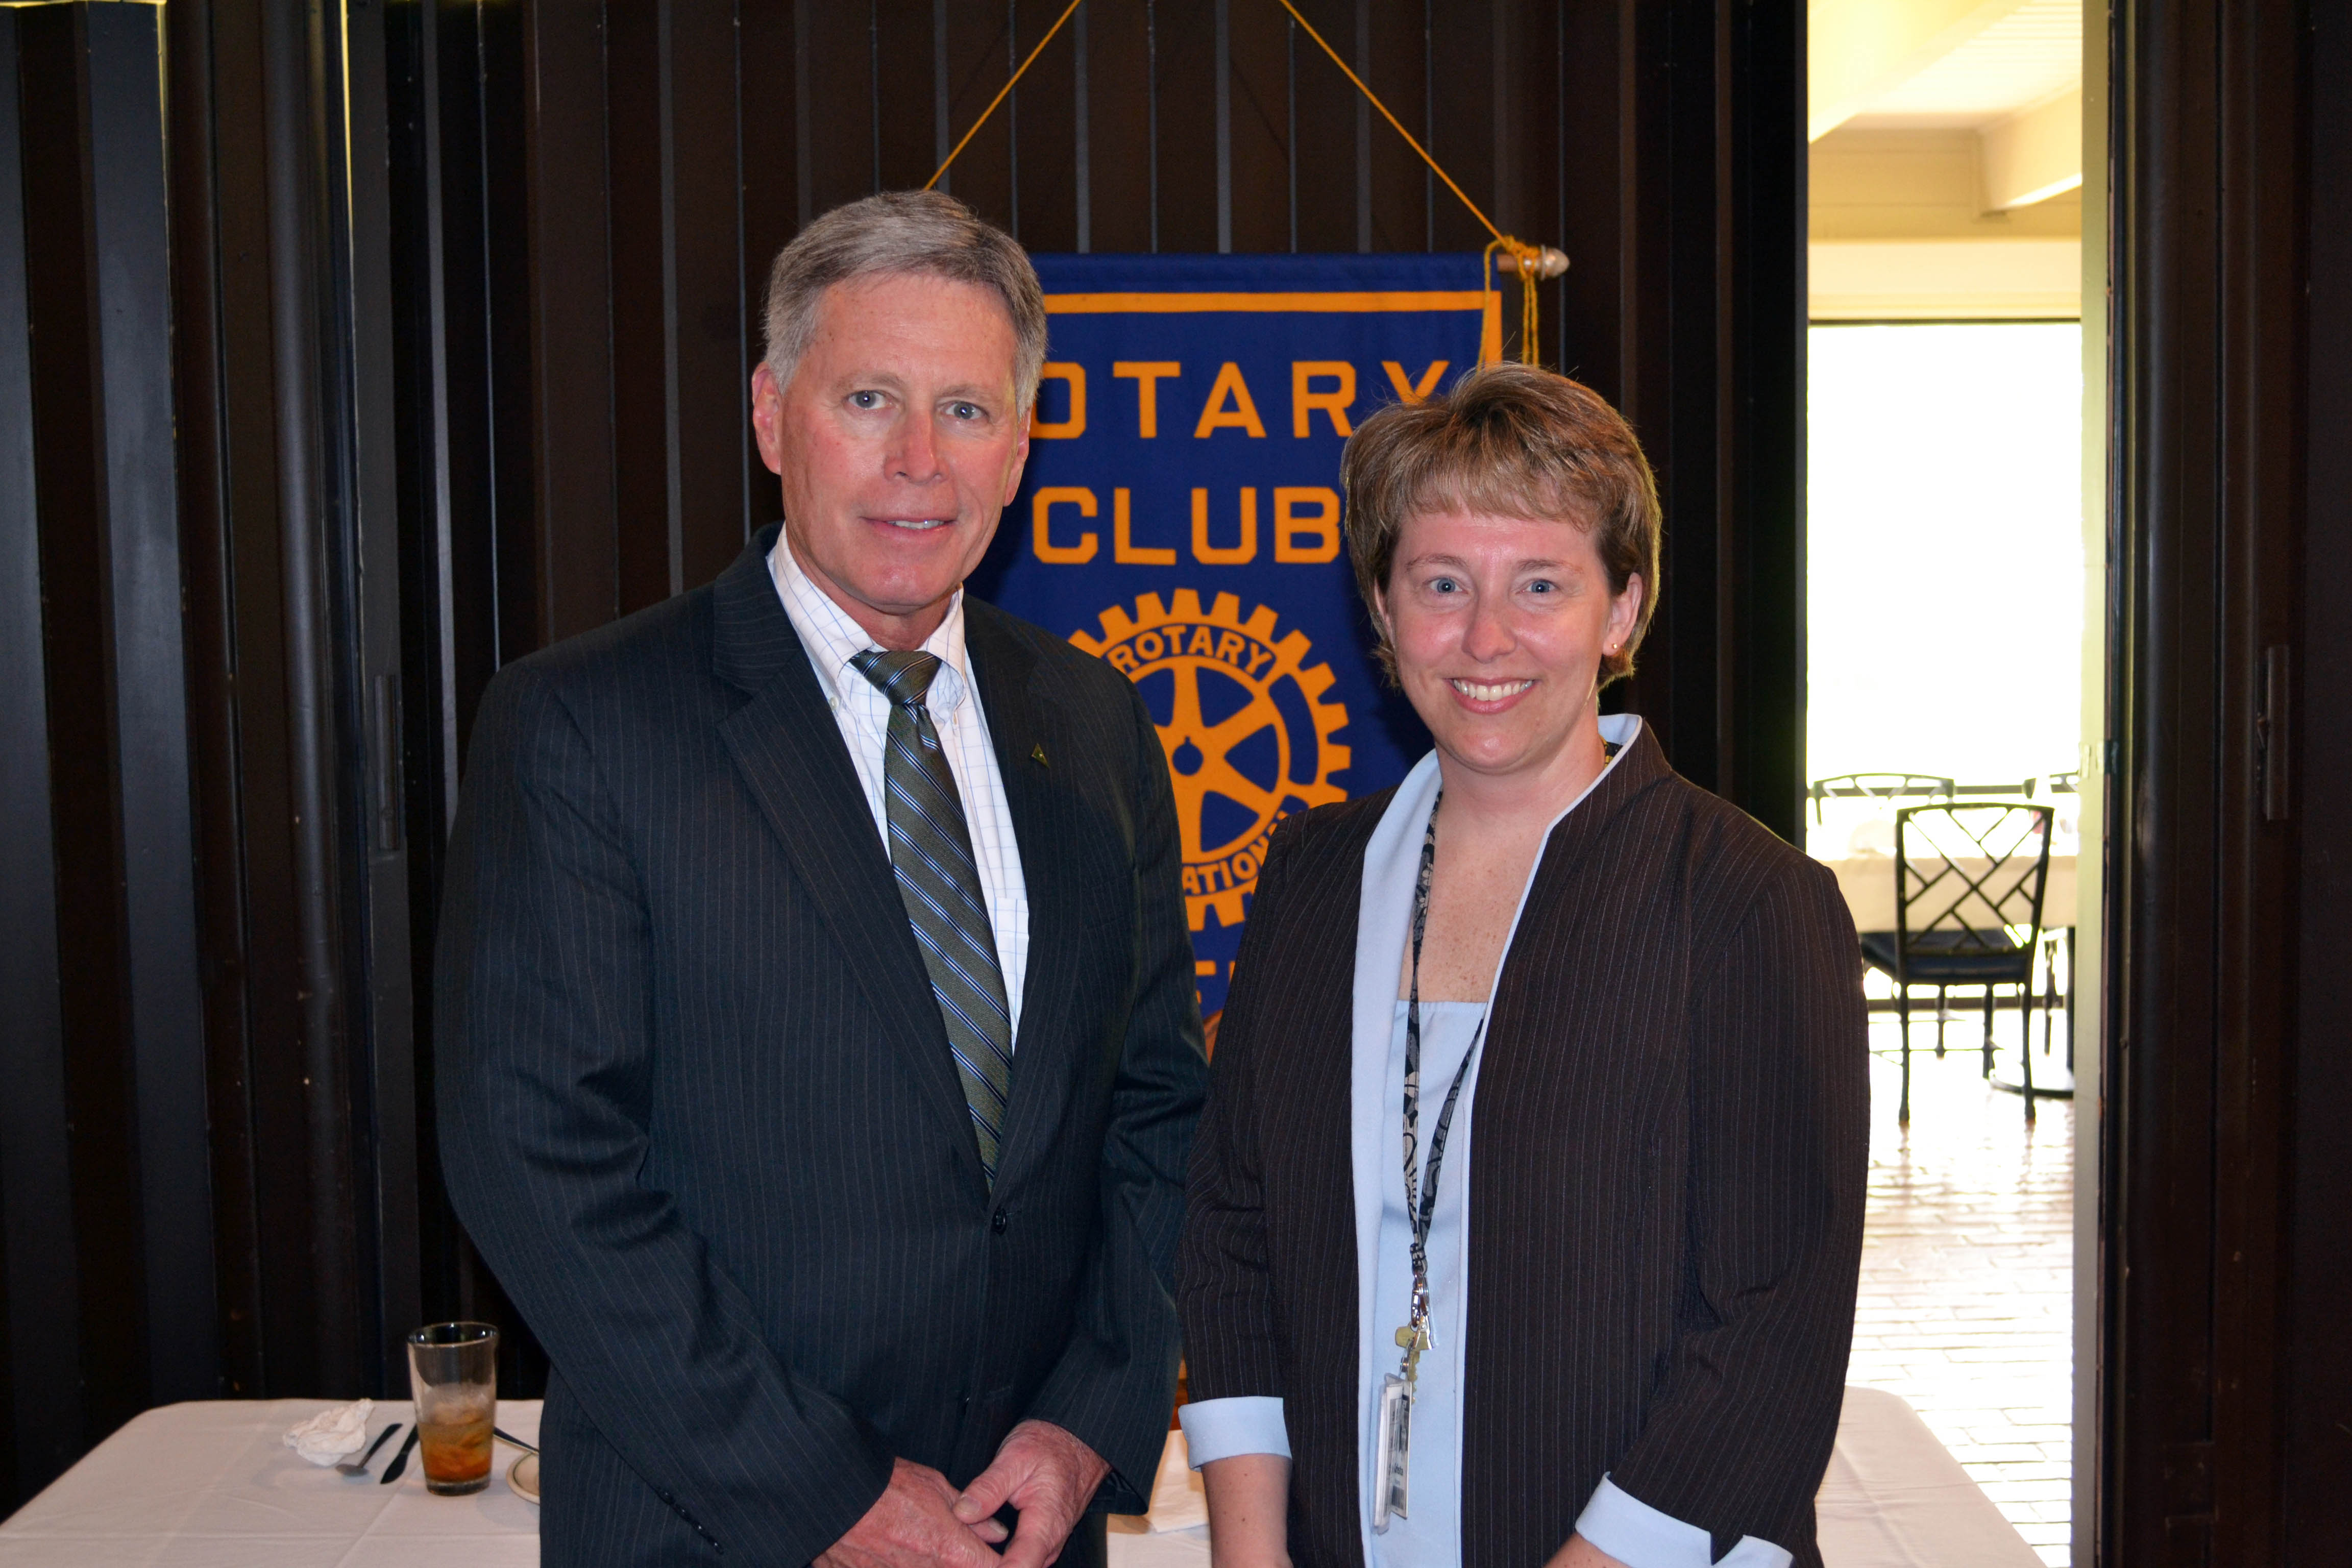 PHOTO: Rotary Club welcomes Delta State President LaForge as a new member and guest speaker Krista Roberts, plant manager of Baxter Healthcare.